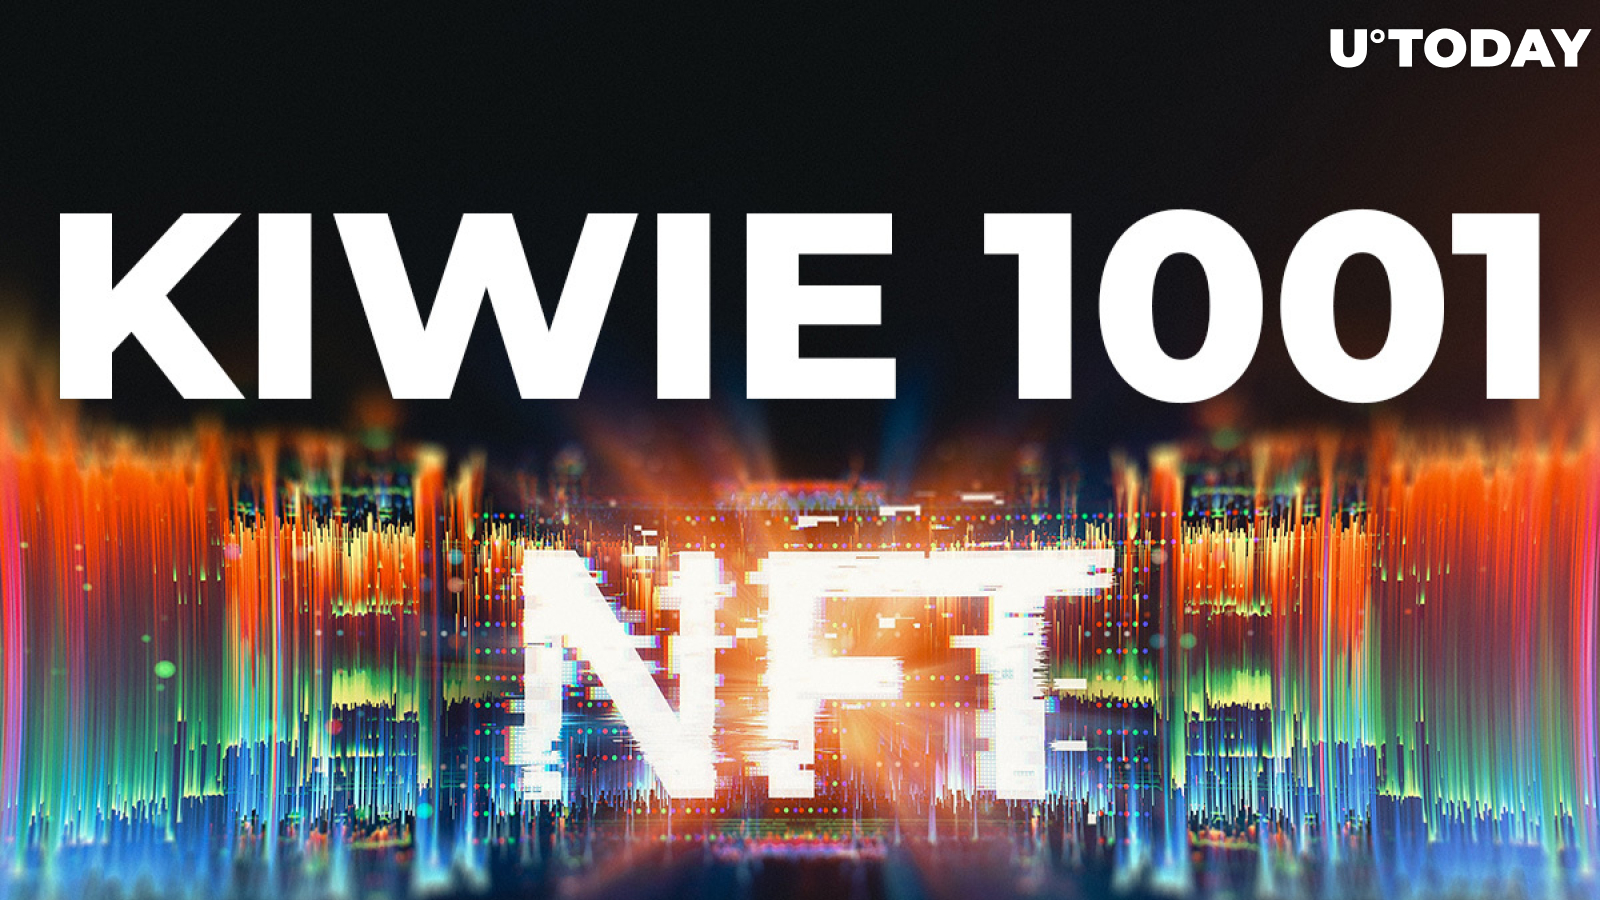 KIWIE 1001 Launches Offline Showroom in Latvia to Promote NFT Artists